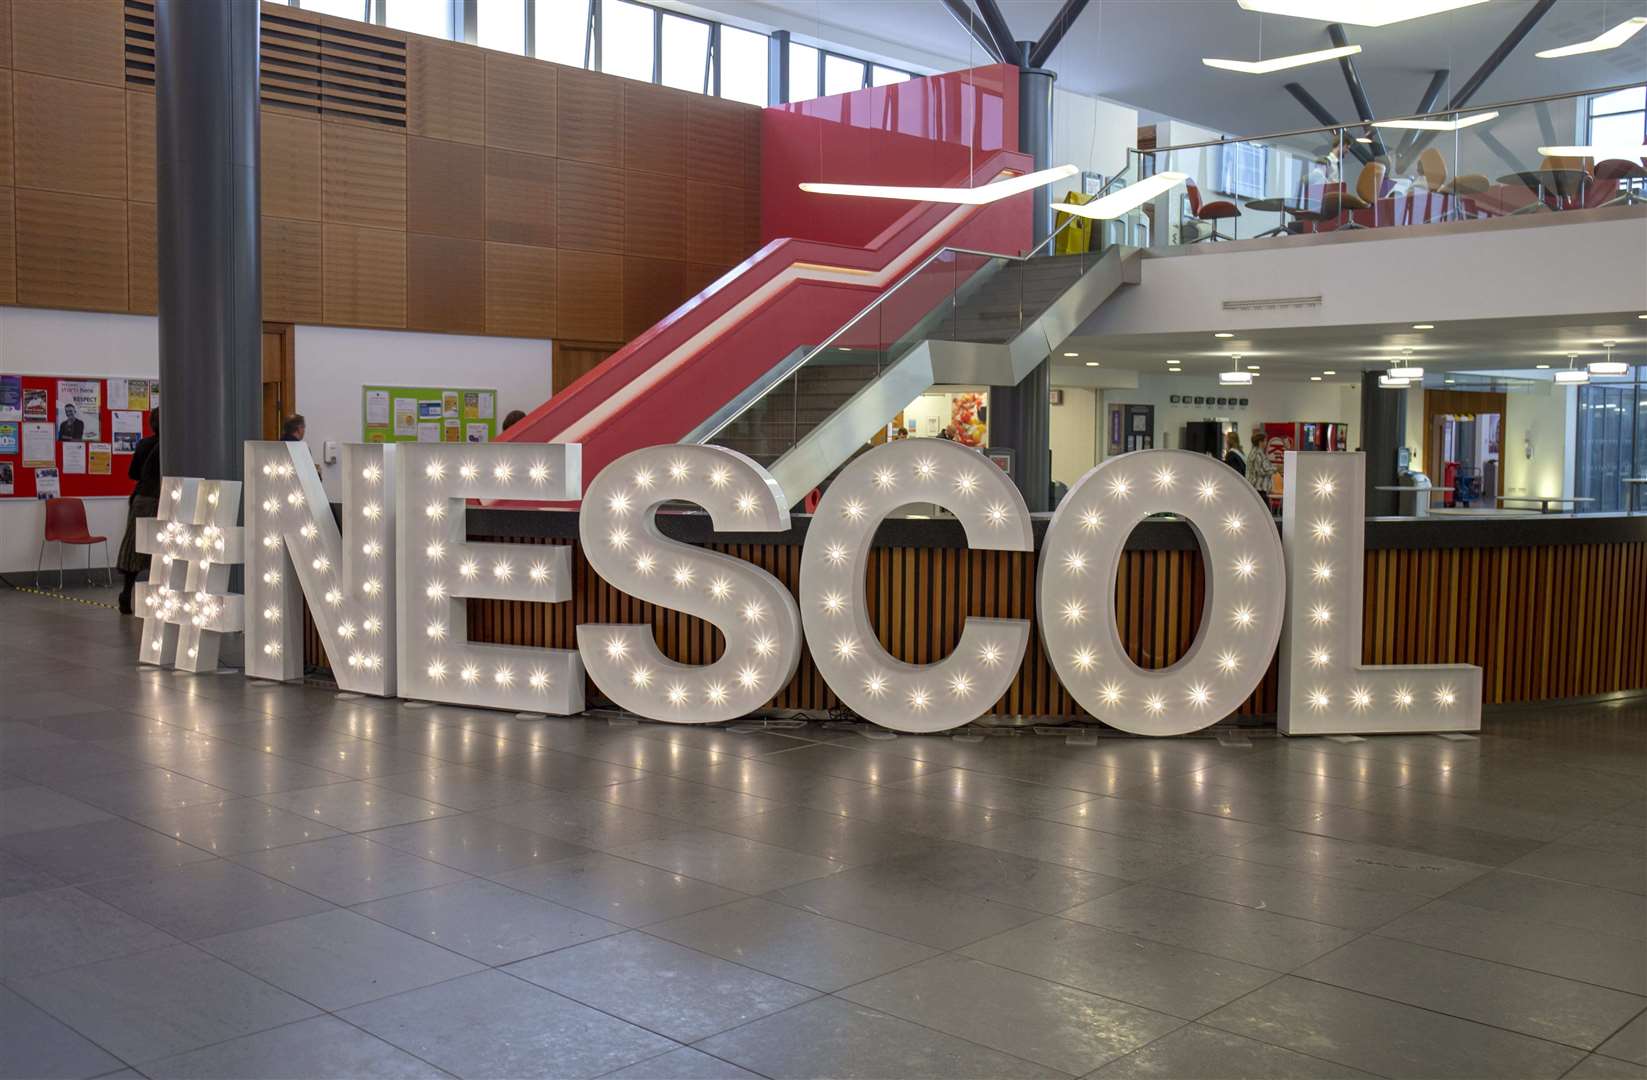 Nescol have signed up to a pledge to be net zero by 2050.